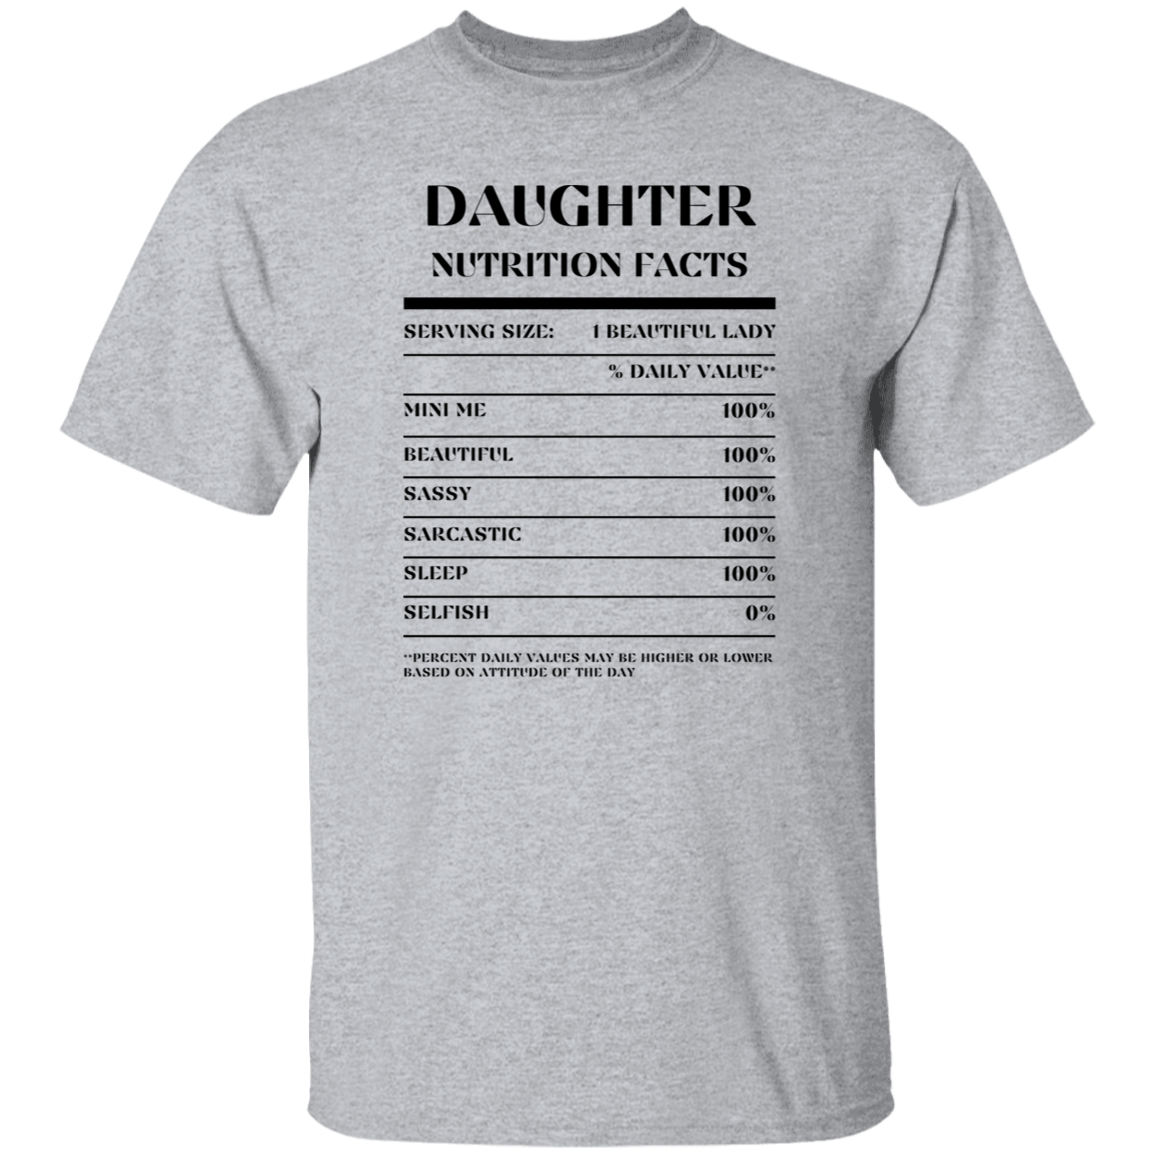 Nutrition Facts T-Shirt SS - Daughter - Black